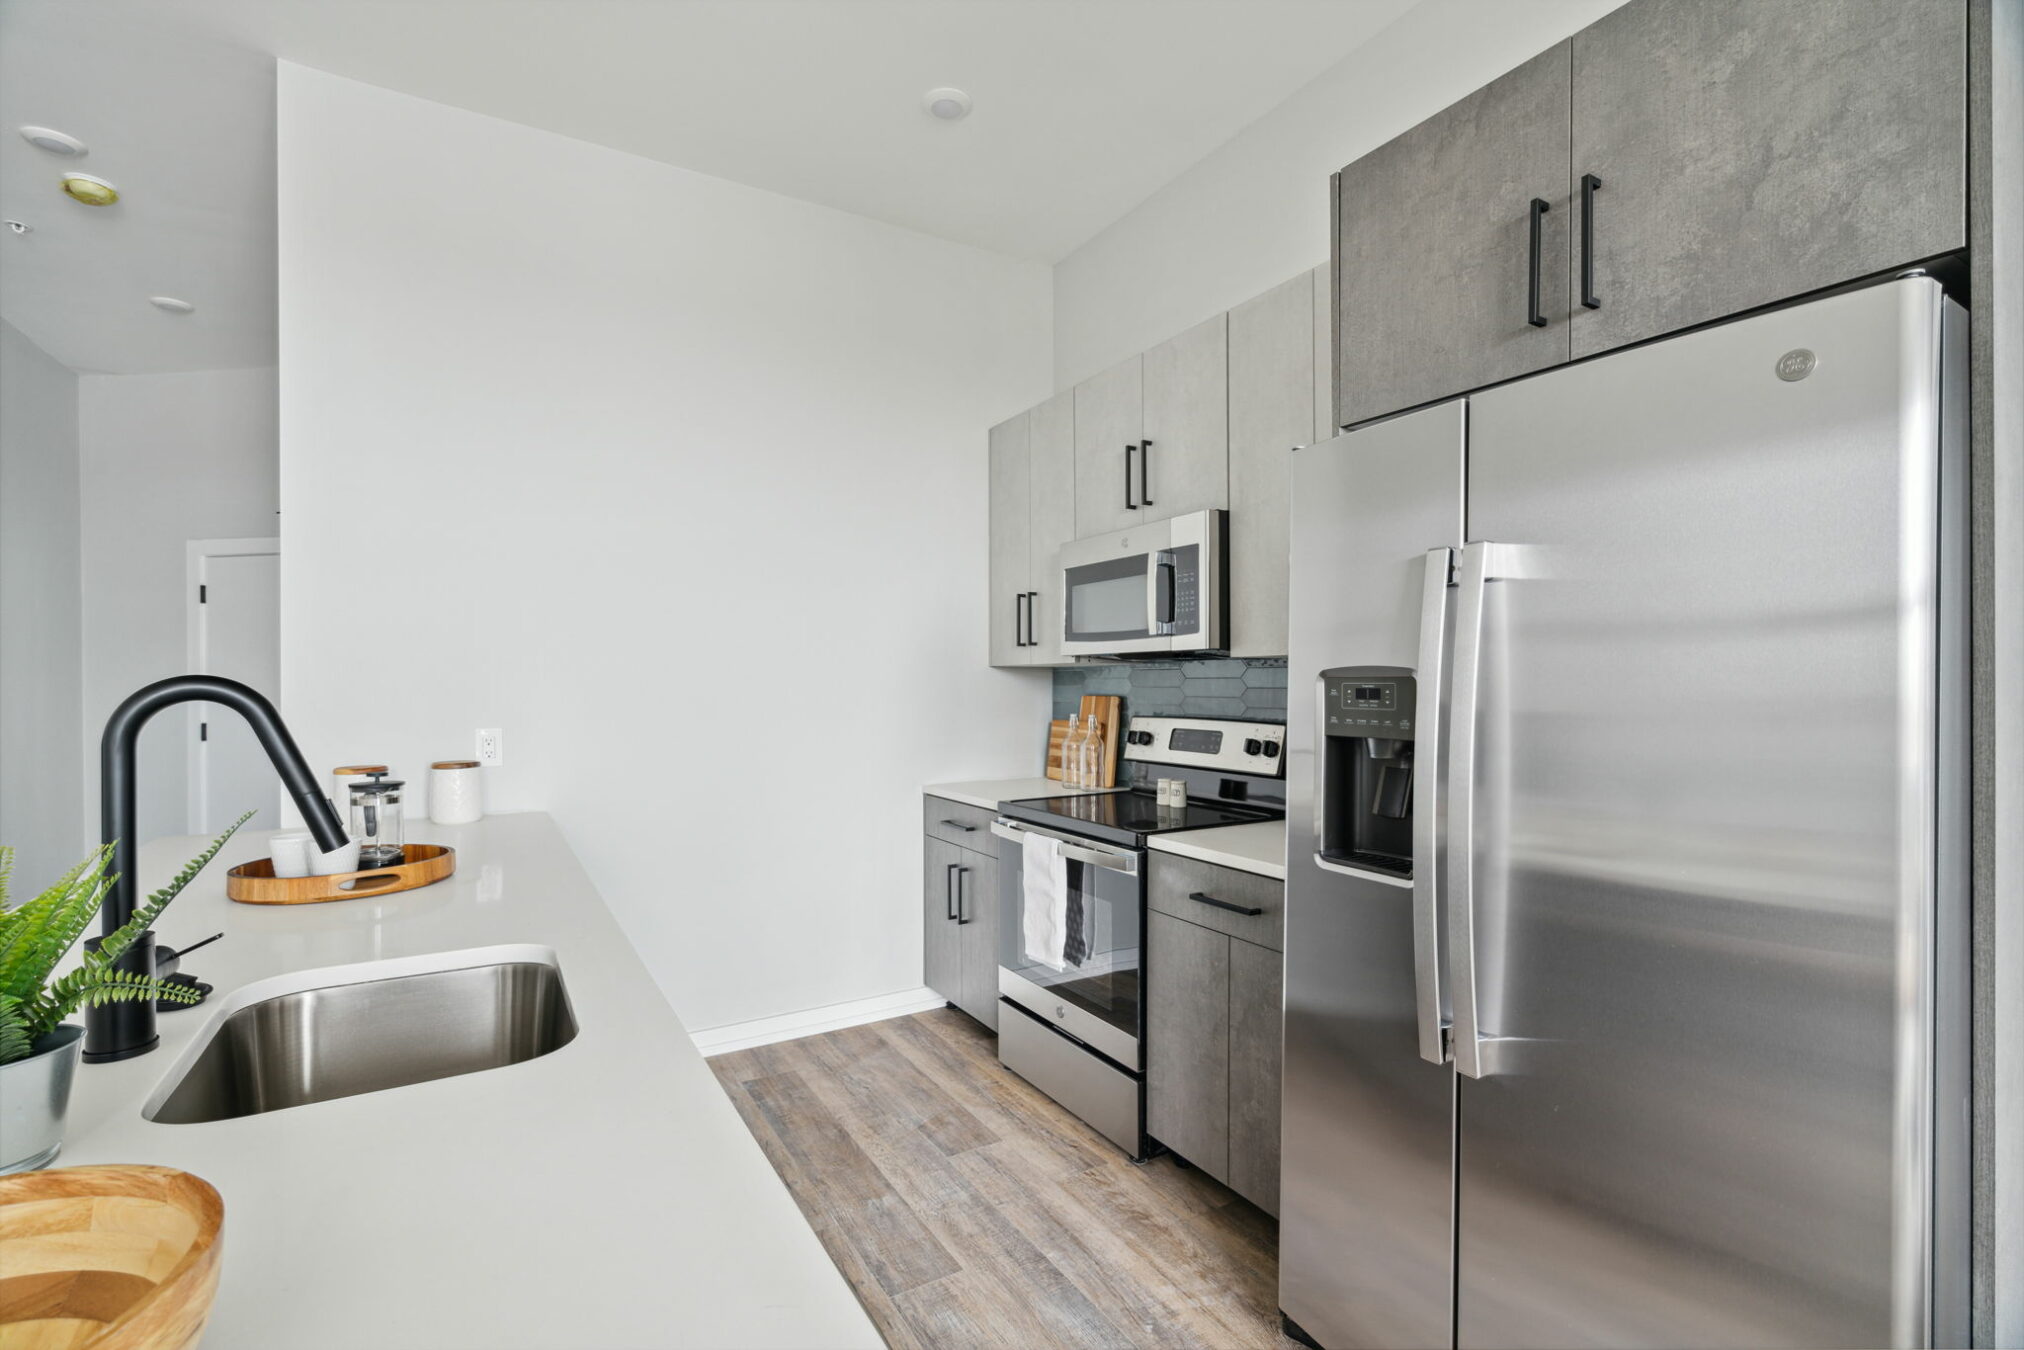 Property Photo For 2233 N 7th St, Unit 209